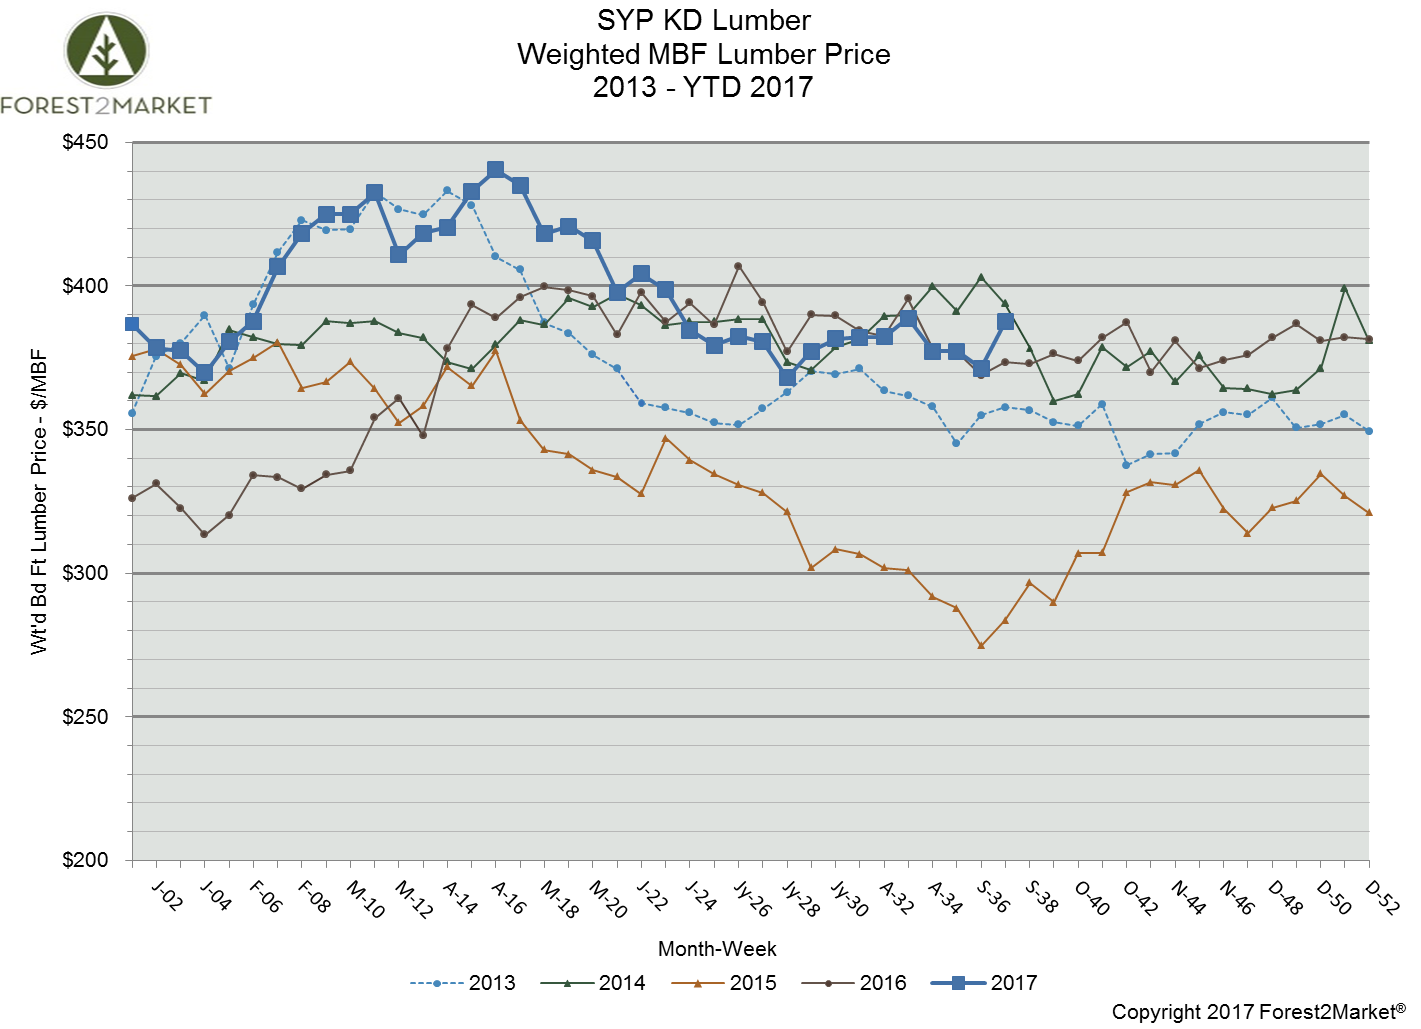 Southern Yellow Pine Lumber Prices Spike in September